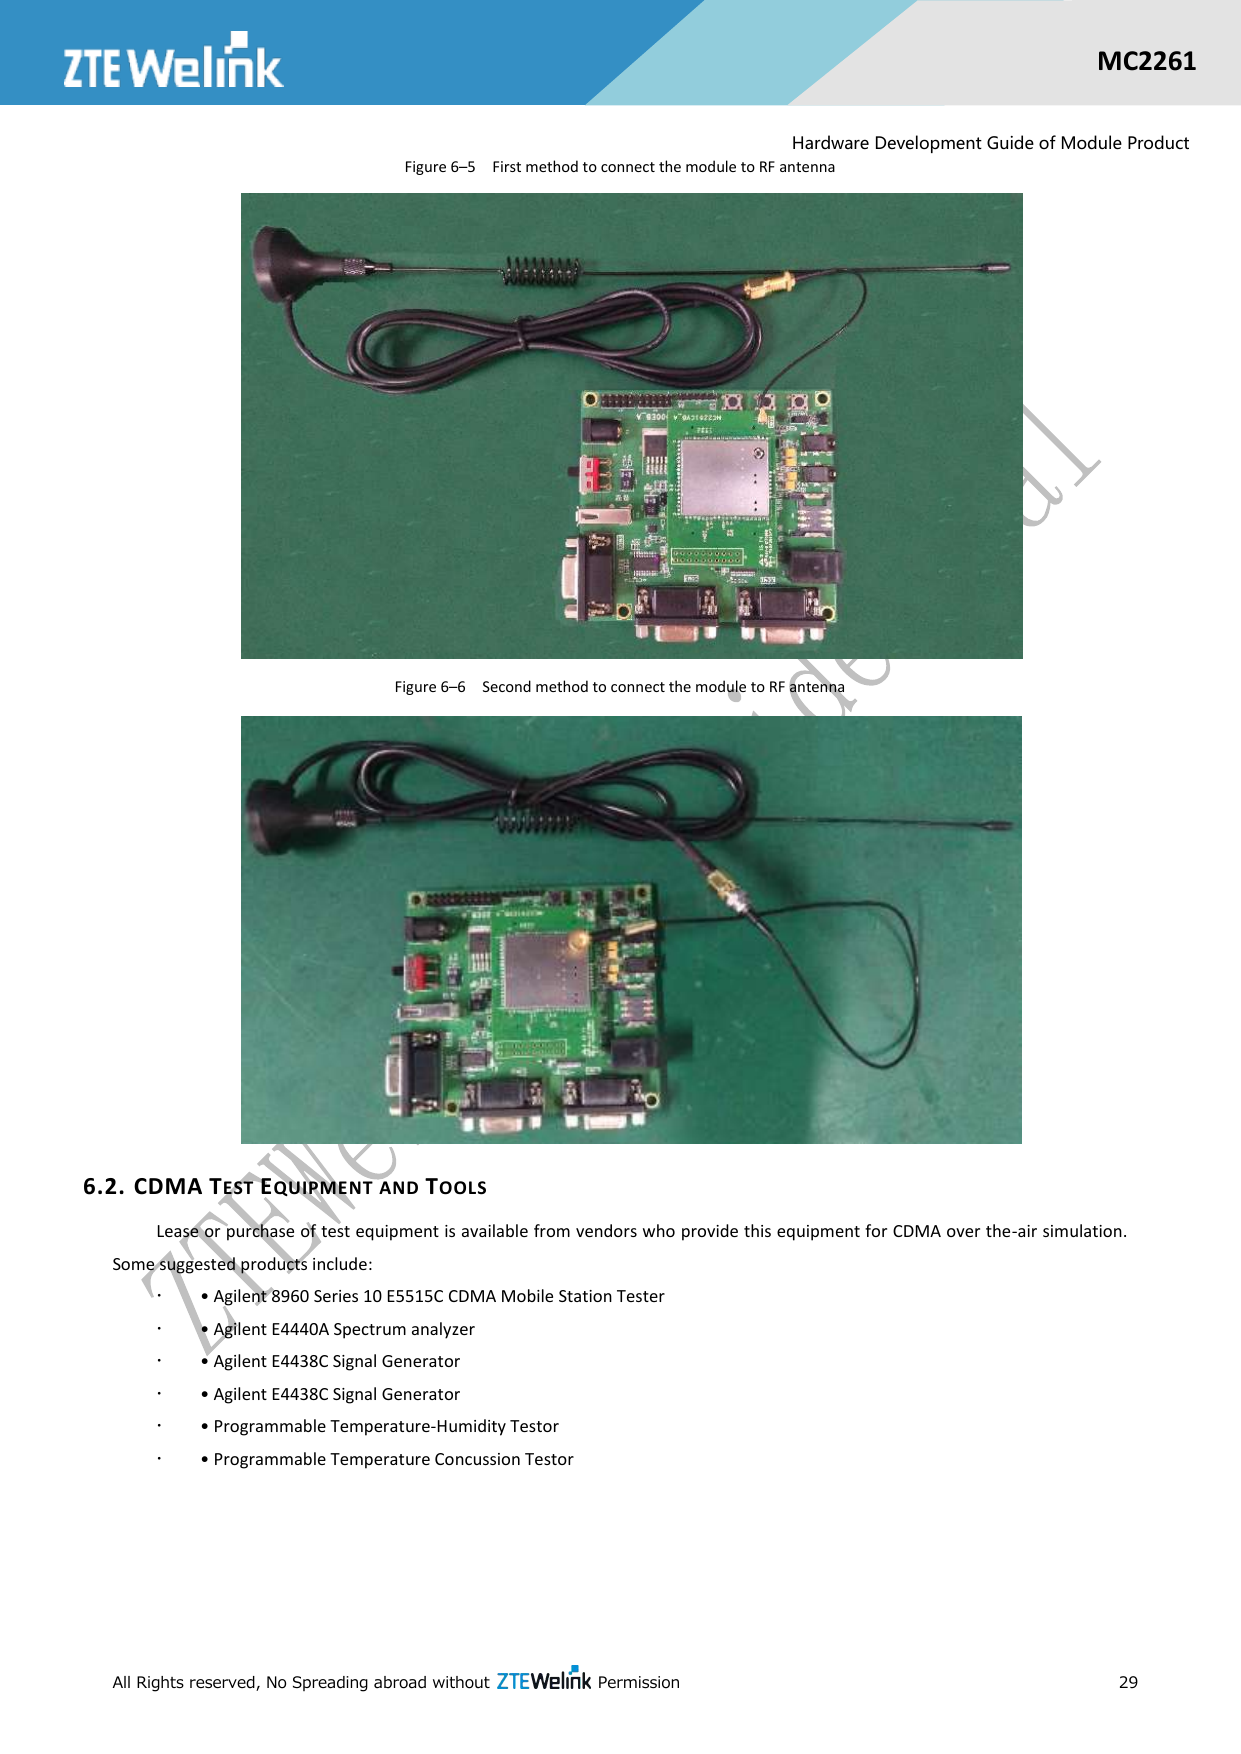  All Rights reserved, No Spreading abroad without    Permission      29  MC2261  Hardware Development Guide of Module Product Figure 6–5  First method to connect the module to RF antenna  Figure 6–6  Second method to connect the module to RF antenna  6.2. CDMA TEST EQUIPMENT AND TOOLS Lease or purchase of test equipment is available from vendors who provide this equipment for CDMA over the-air simulation. Some suggested products include:  • Agilent 8960 Series 10 E5515C CDMA Mobile Station Tester  • Agilent E4440A Spectrum analyzer  • Agilent E4438C Signal Generator  • Agilent E4438C Signal Generator  • Programmable Temperature-Humidity Testor  • Programmable Temperature Concussion Testor 